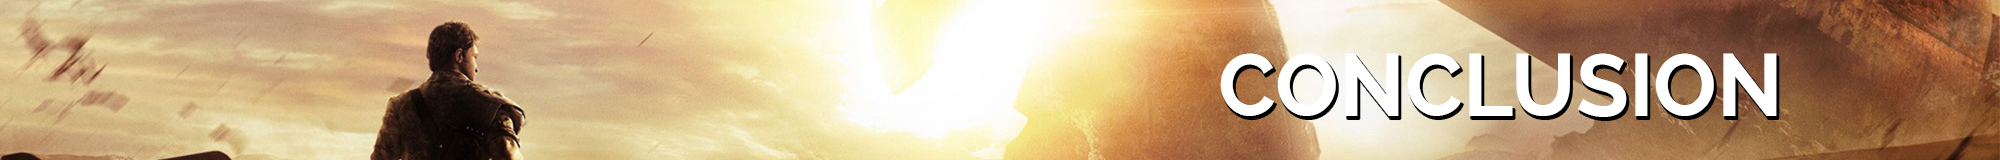 BANNER_MM_0000_CONCLUSION